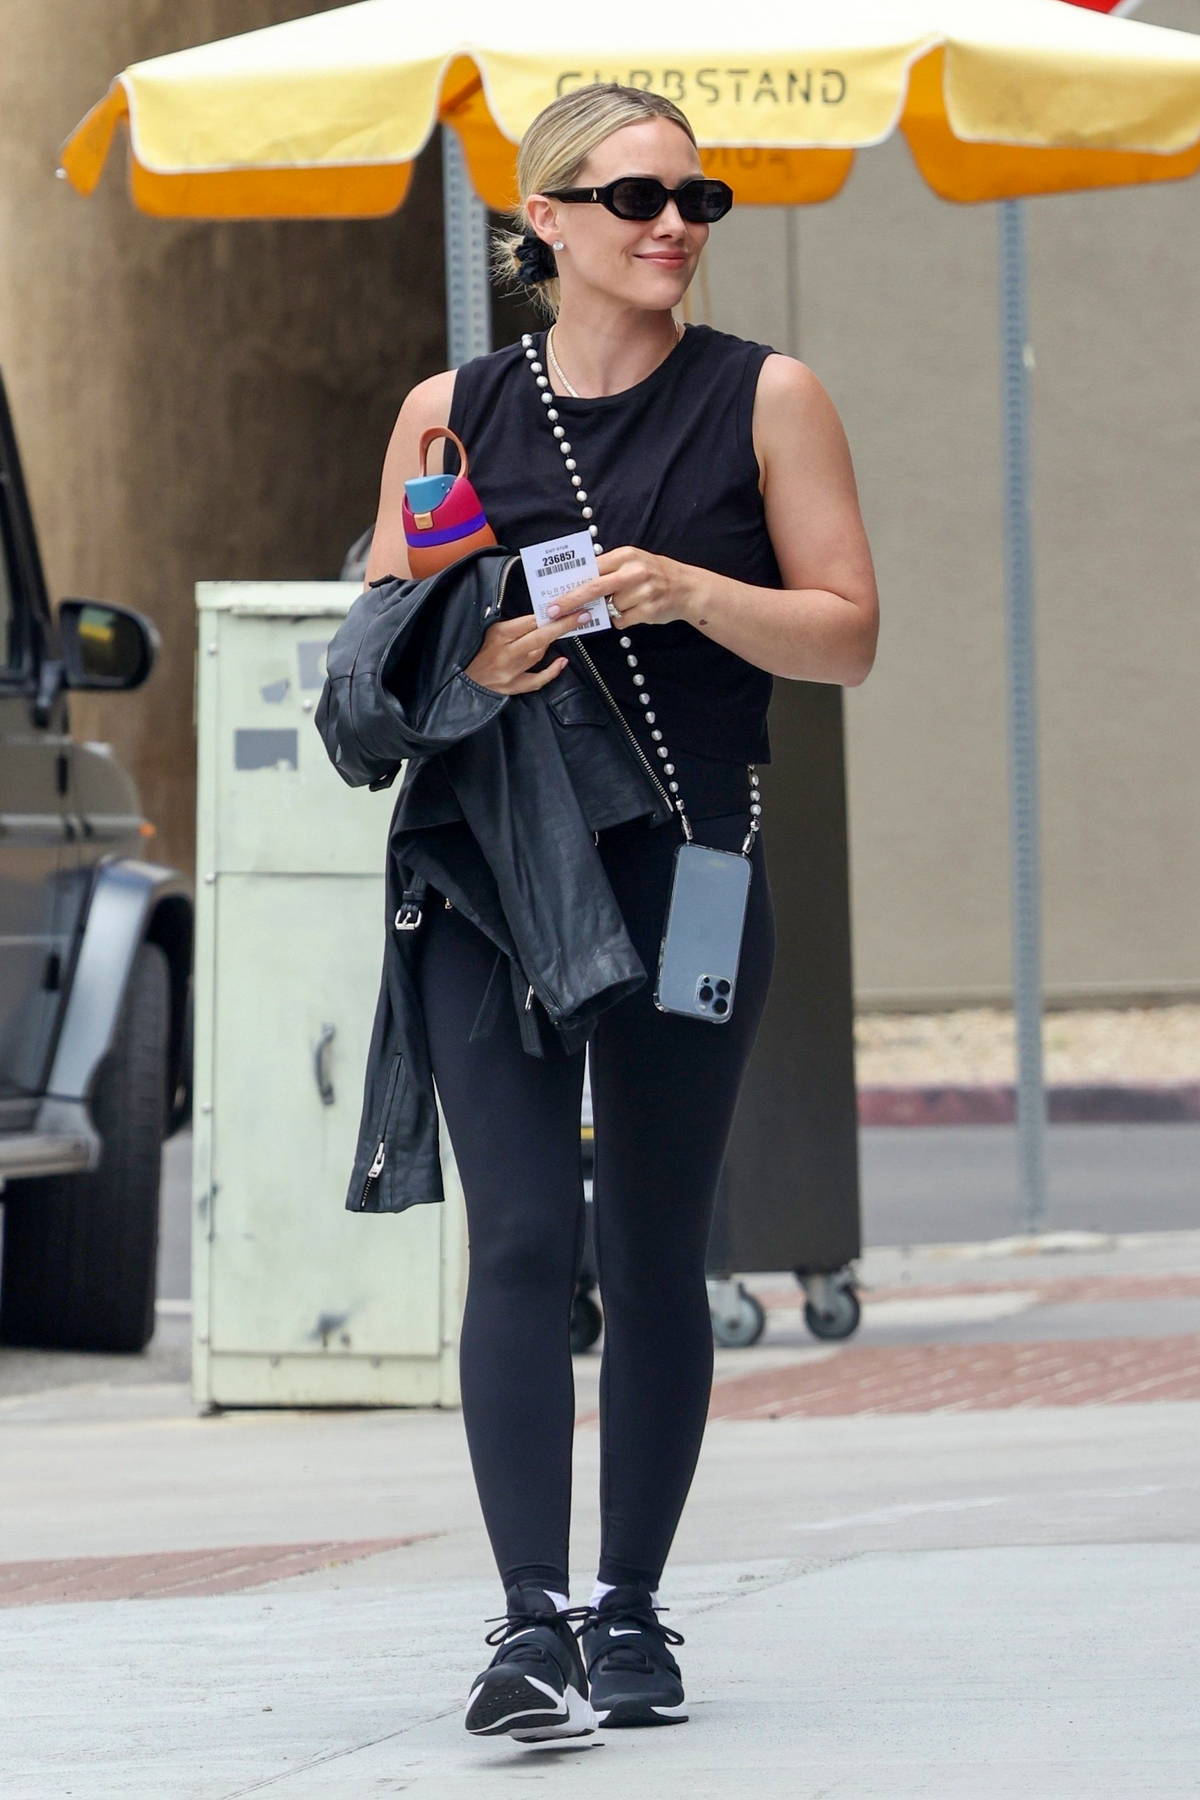 Hilary Duff sports a black top and leggings as she heads to the gym for her